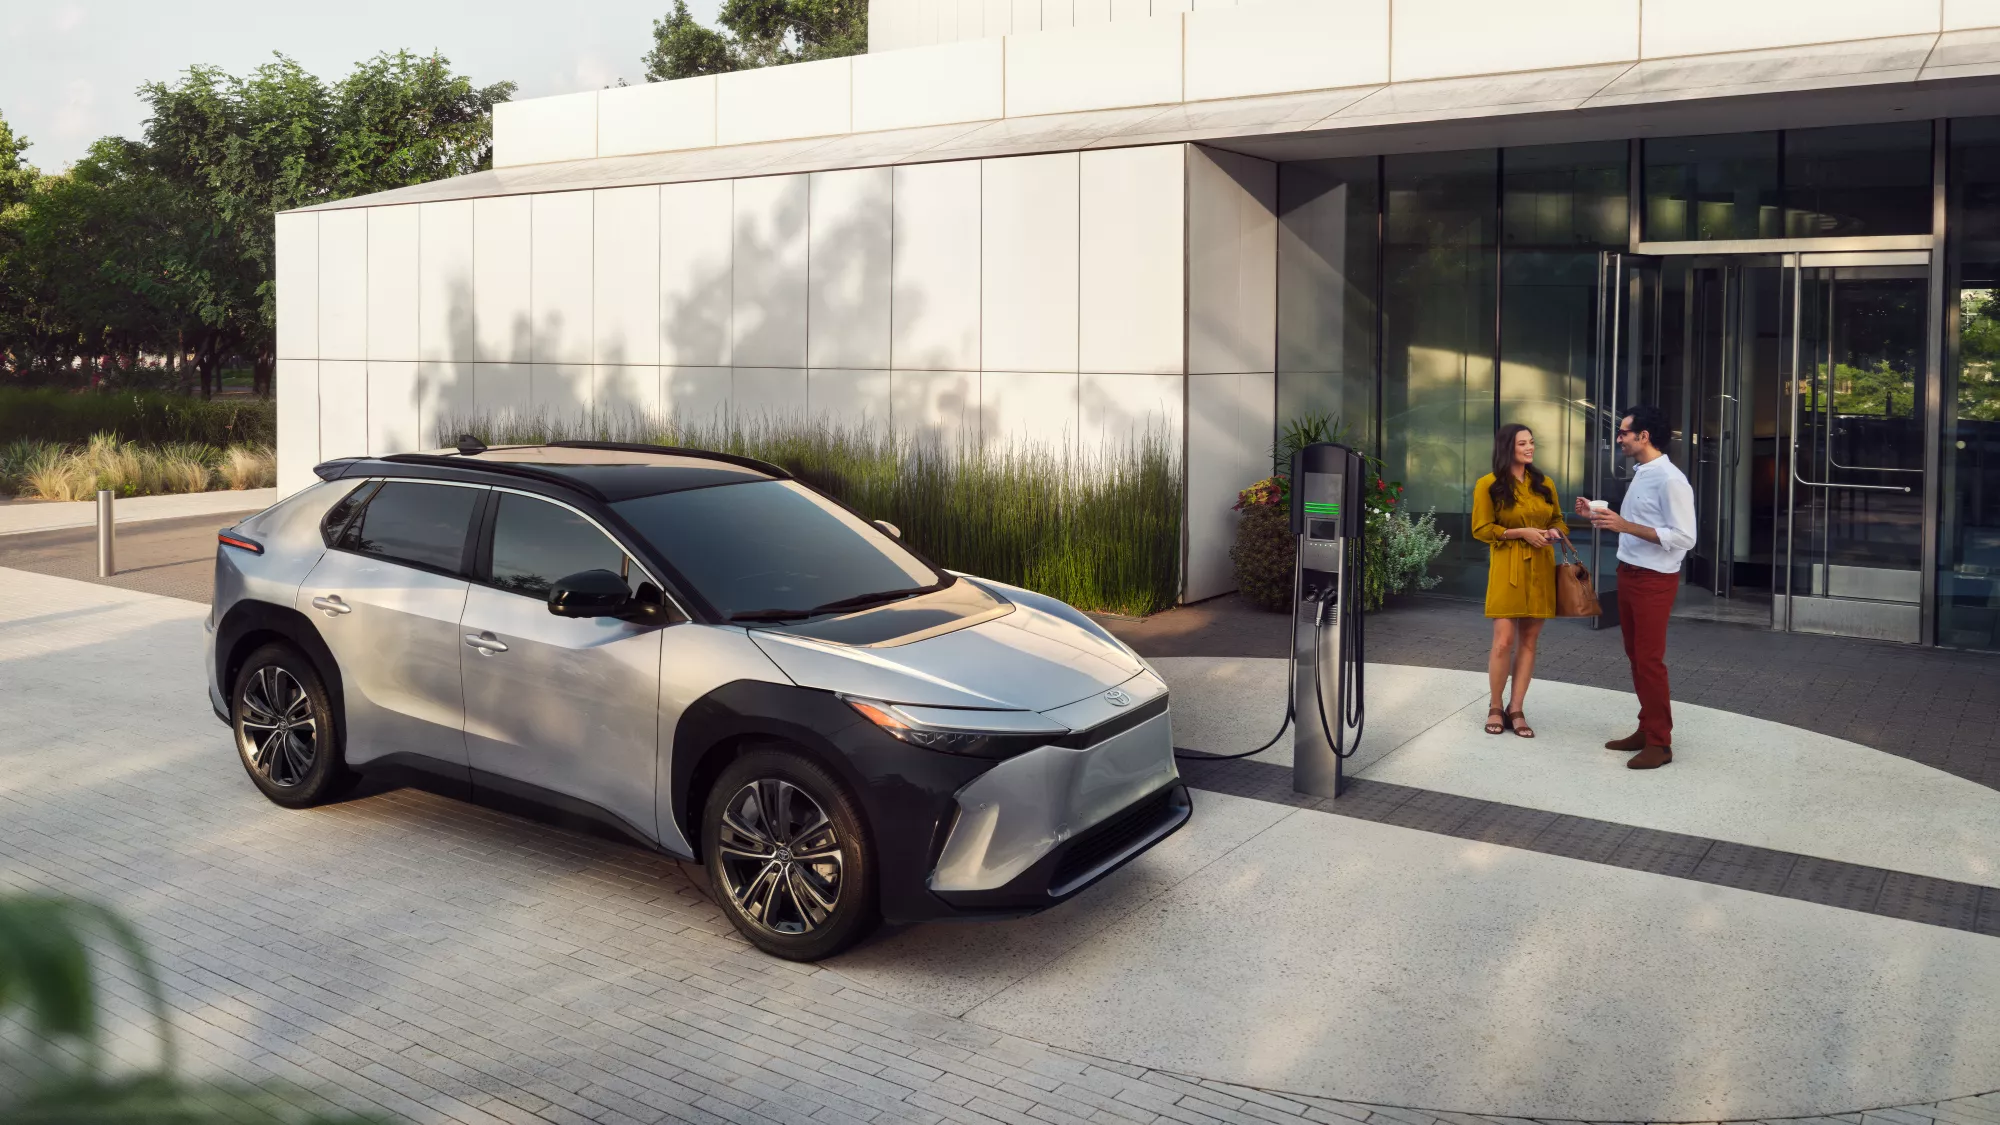 Weekly roundup – Latest Electric Vehicles releases